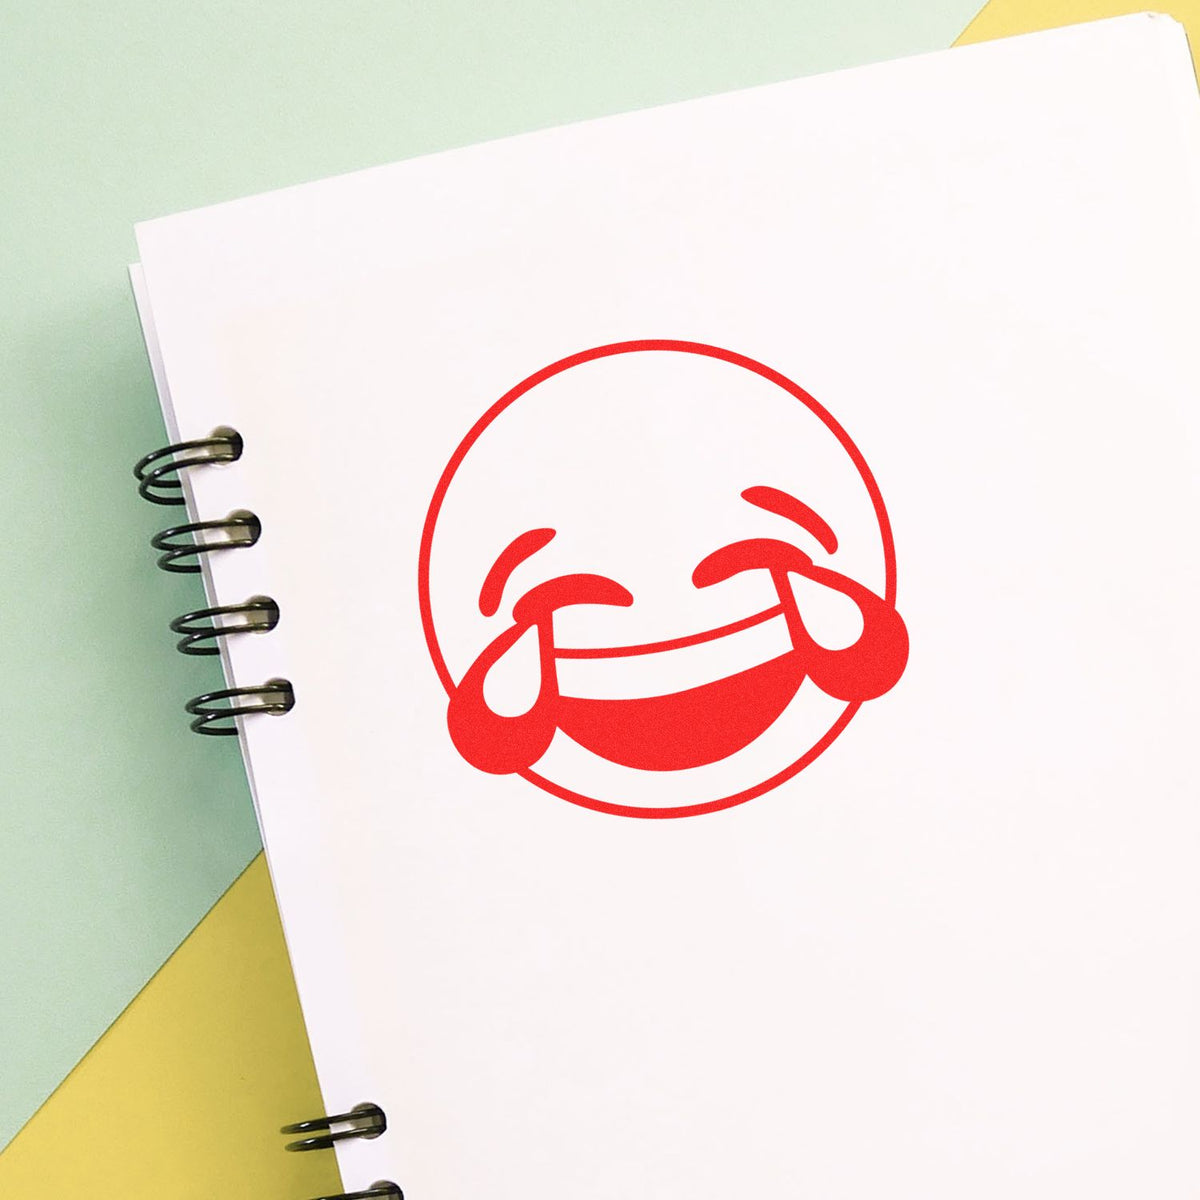 Round Laughing Smiley Rubber Stamp In Use Photo